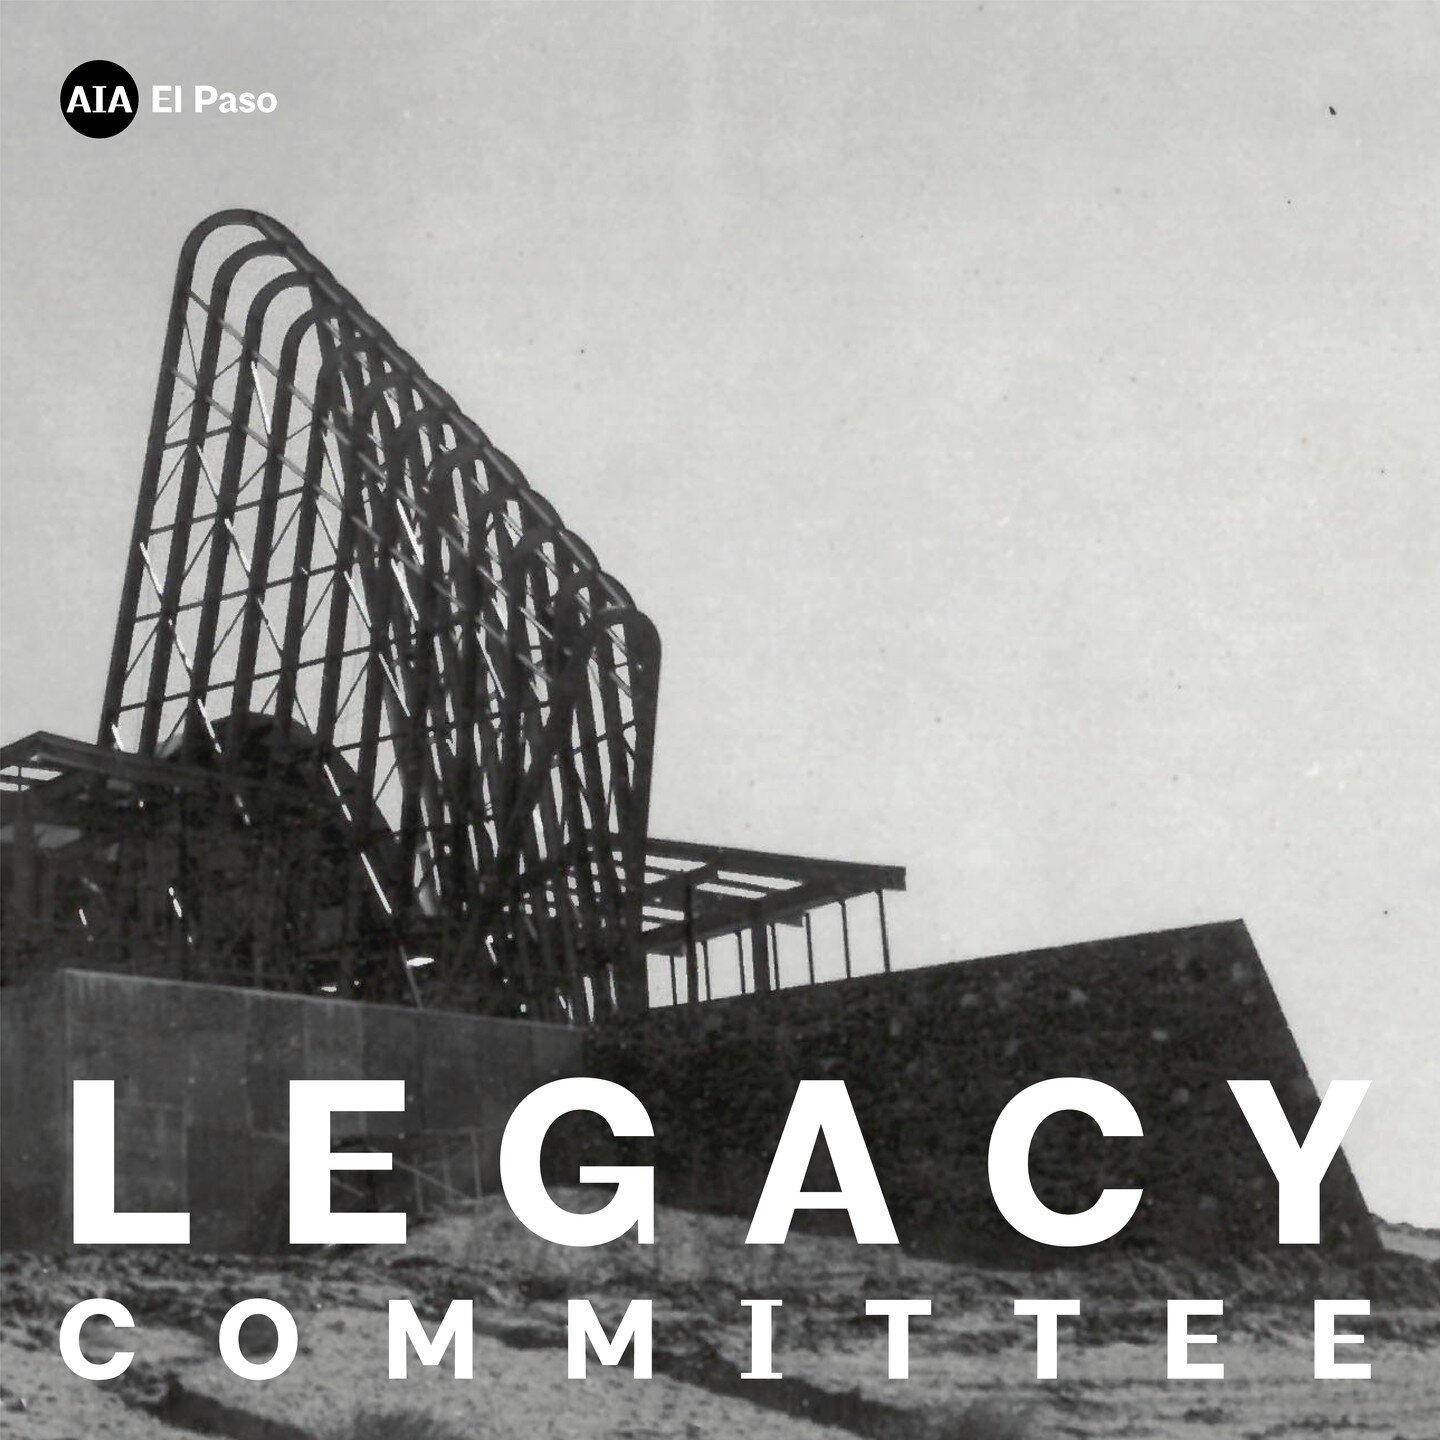 This year, the El Paso AIA Chapter formed the Legacy Committee. Our goal is to build a living archive to record and celebrate the work of past and current architects and architecture firms in El Paso. This living archive will be made available to the